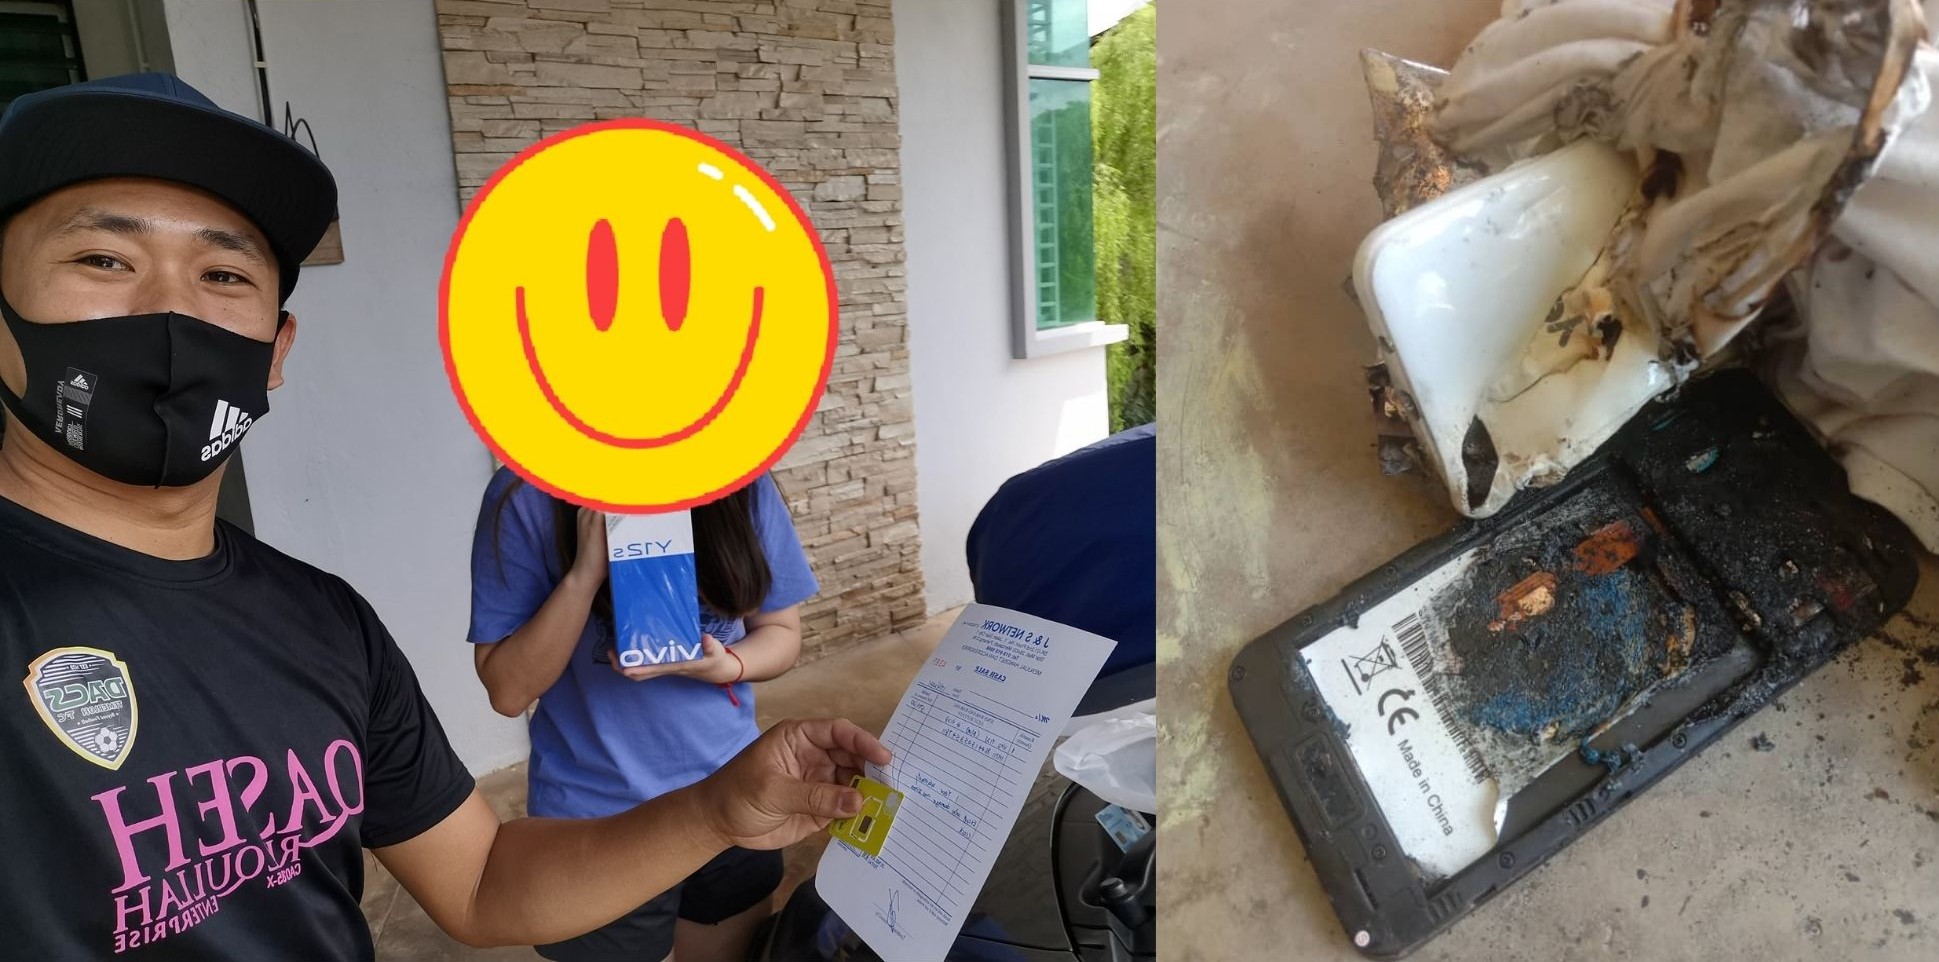 The teacher had managed to raise enough money for a new phone in less than 30 minutes, best part is she even for a new number and free internet for a month.